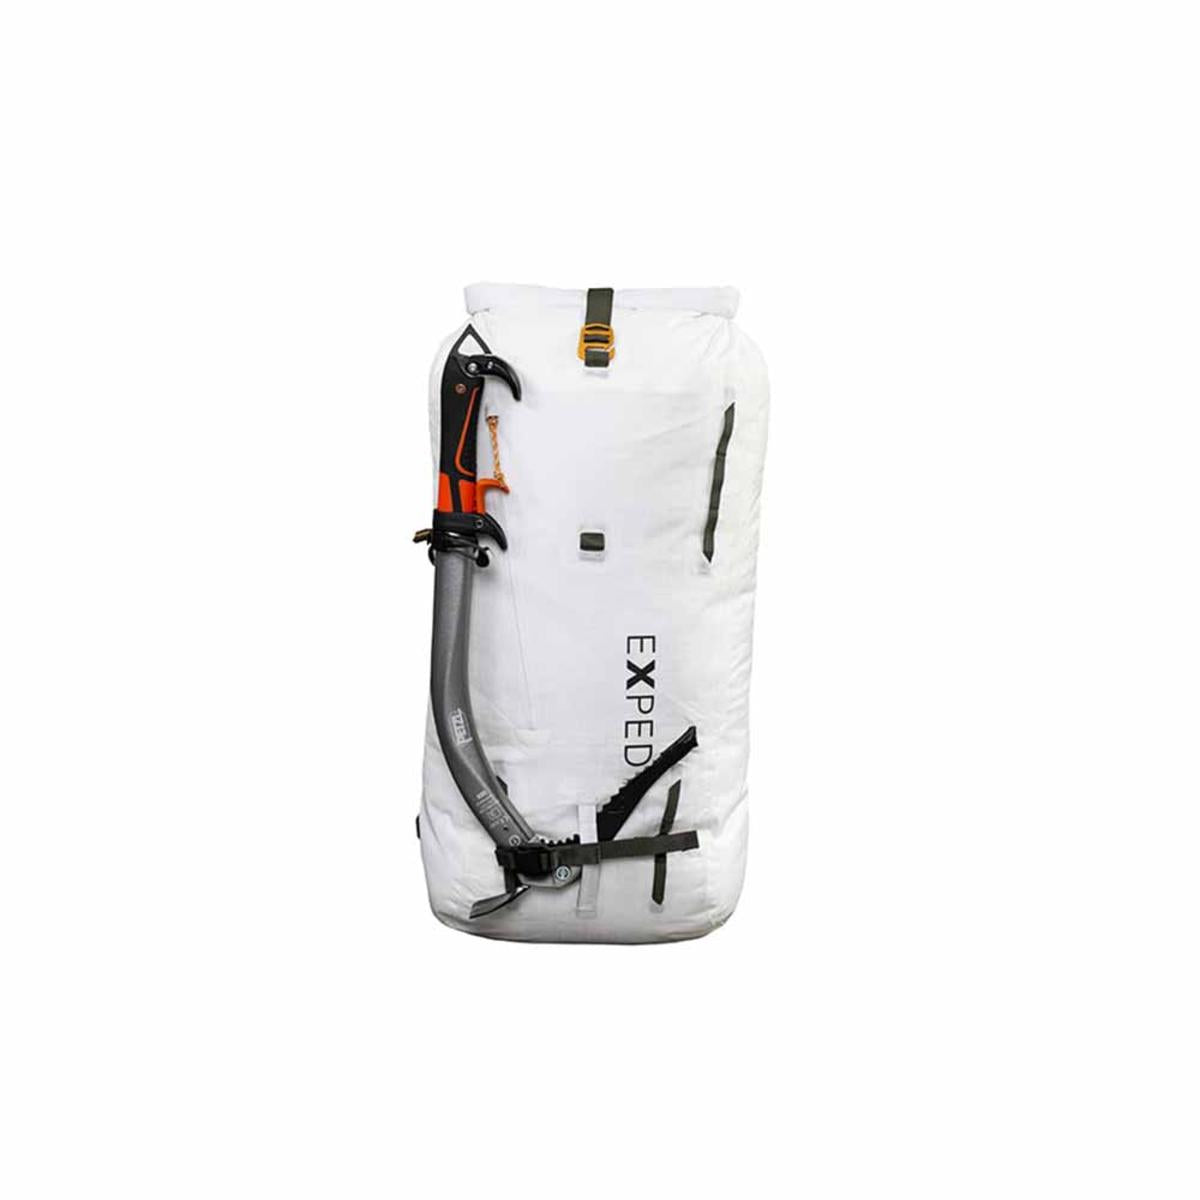 Exped Whiteout 30L Backpack - White/Medium